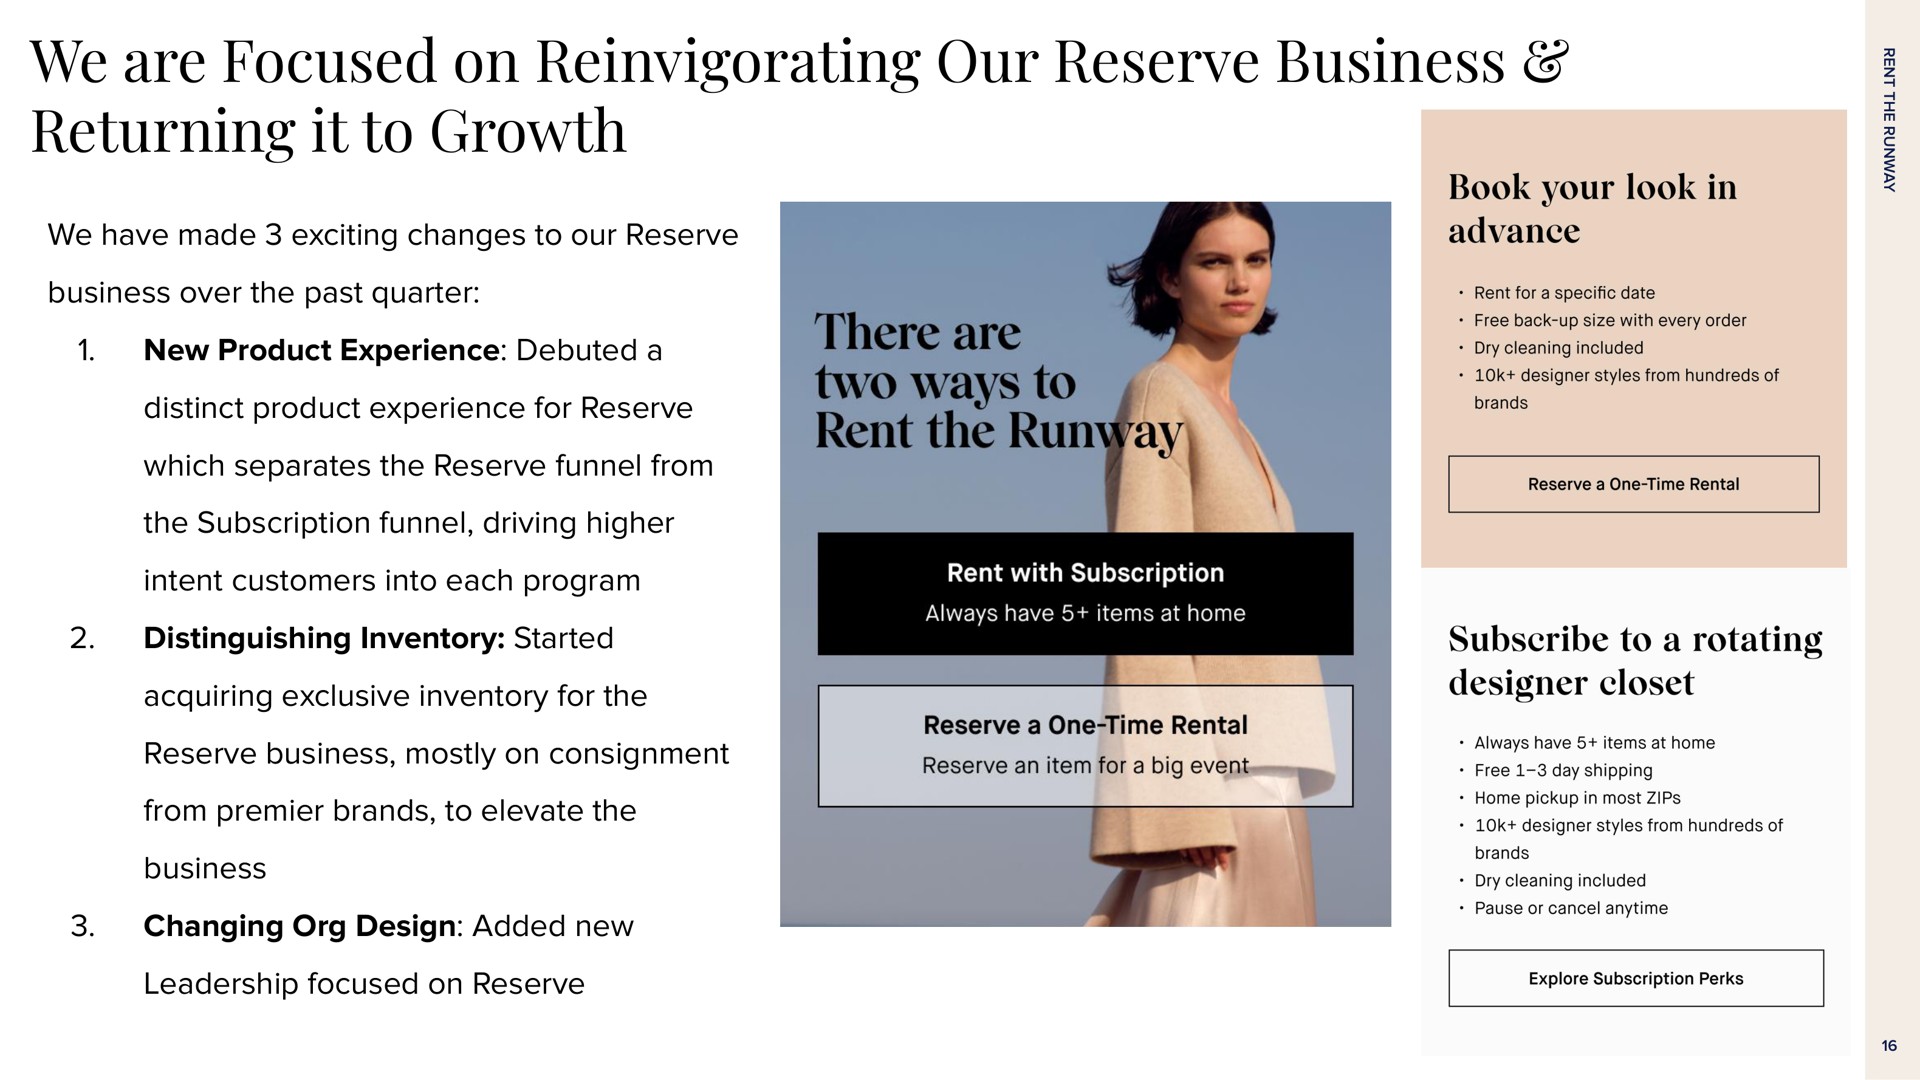 we are focused on reinvigorating our reserve business returning it to growth we have made exciting changes to our reserve business over the past quarter new product experience debuted a distinct product experience for reserve which separates the reserve funnel from the subscription funnel driving higher intent customers into each program distinguishing inventory started acquiring exclusive inventory for the reserve business mostly on consignment from premier brands to elevate the business changing design added new leadership focused on reserve | Rent The Runway